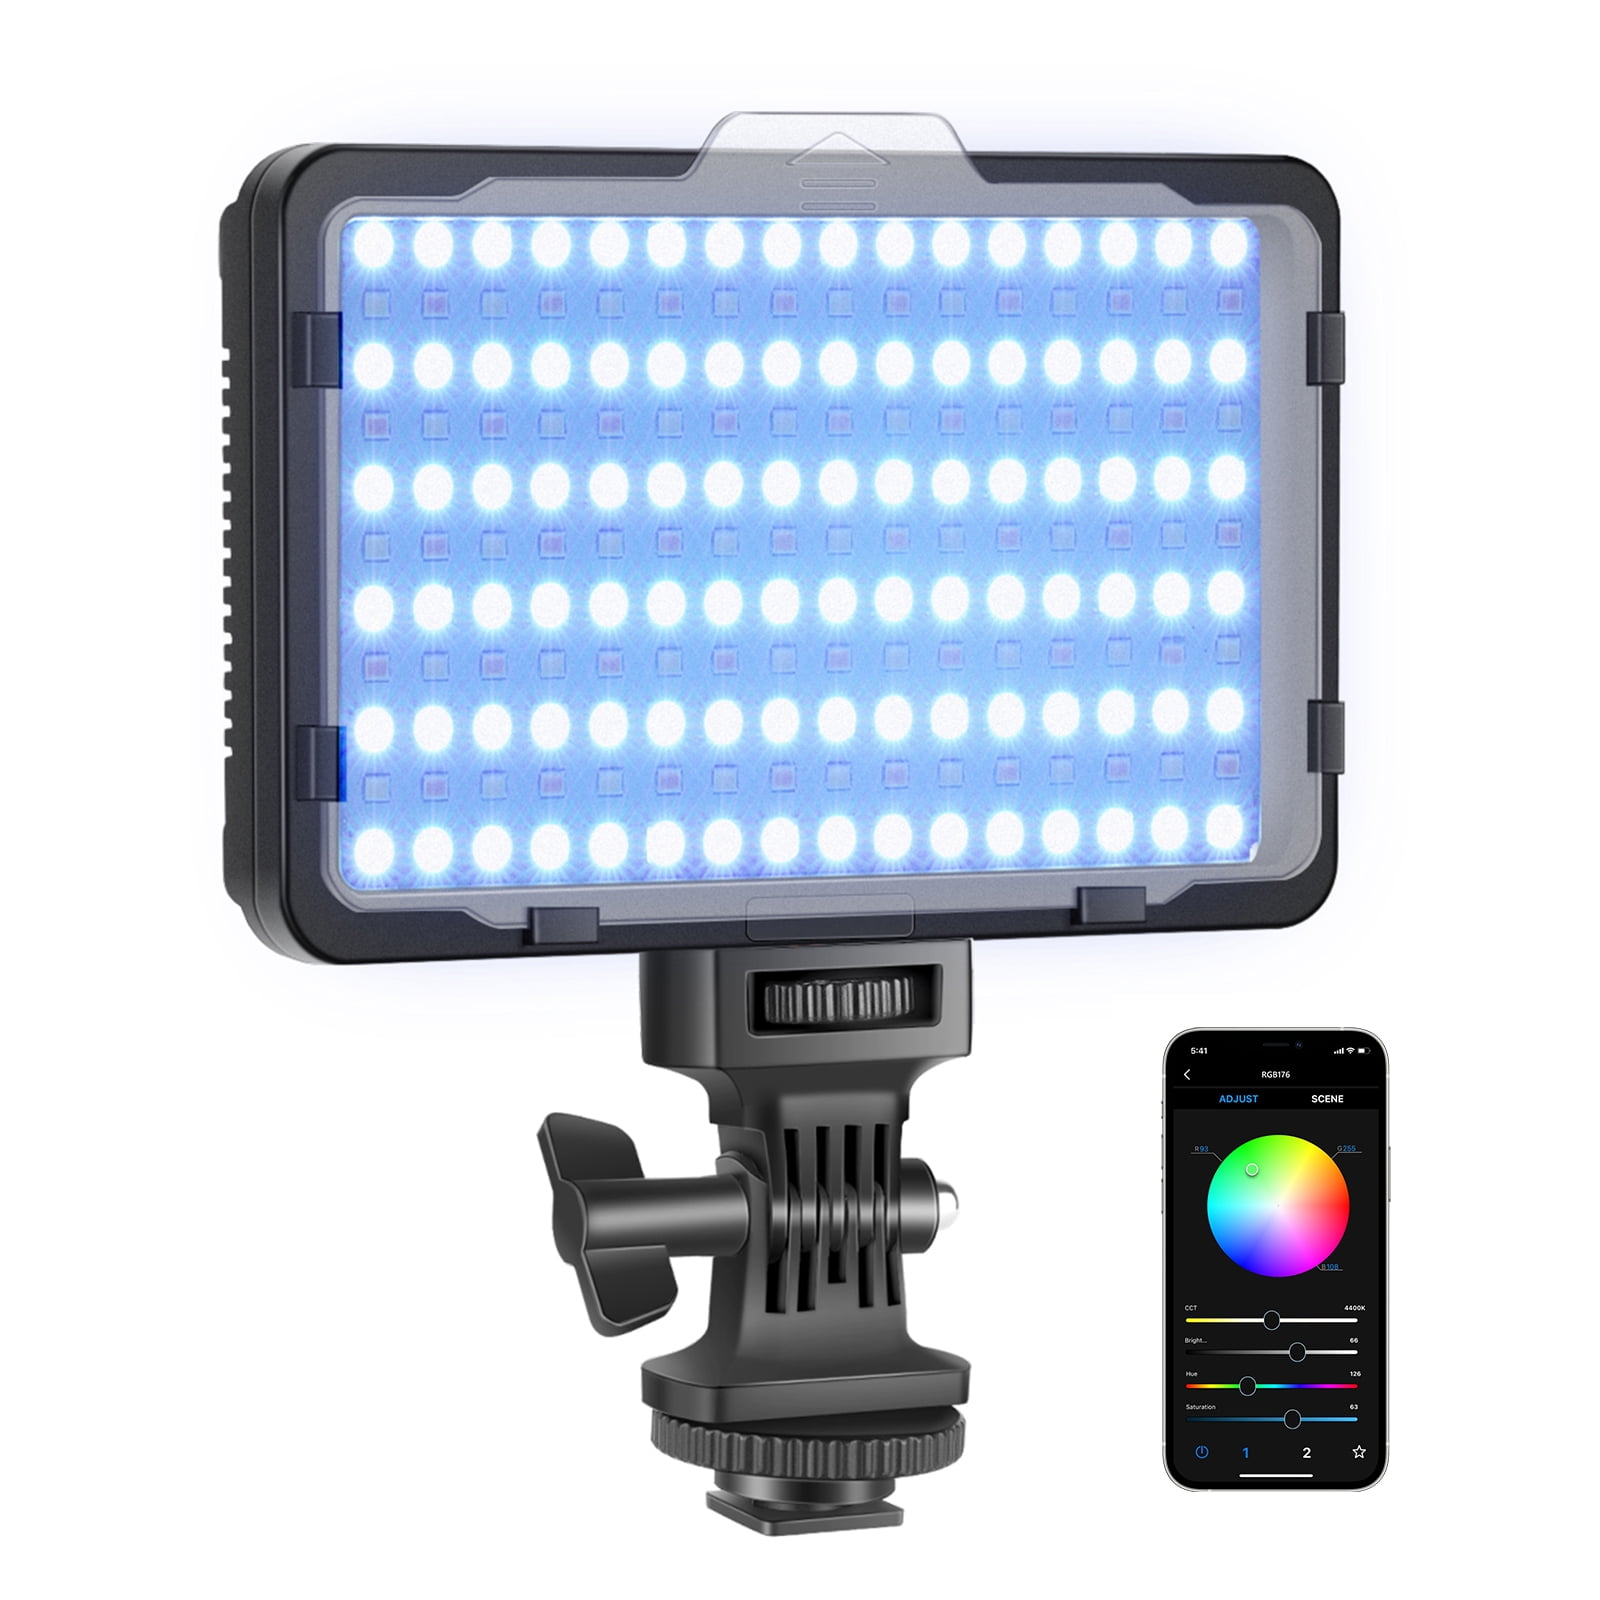 Neewer RGB Video Light with APP Control, 360° Full Color Led Camera